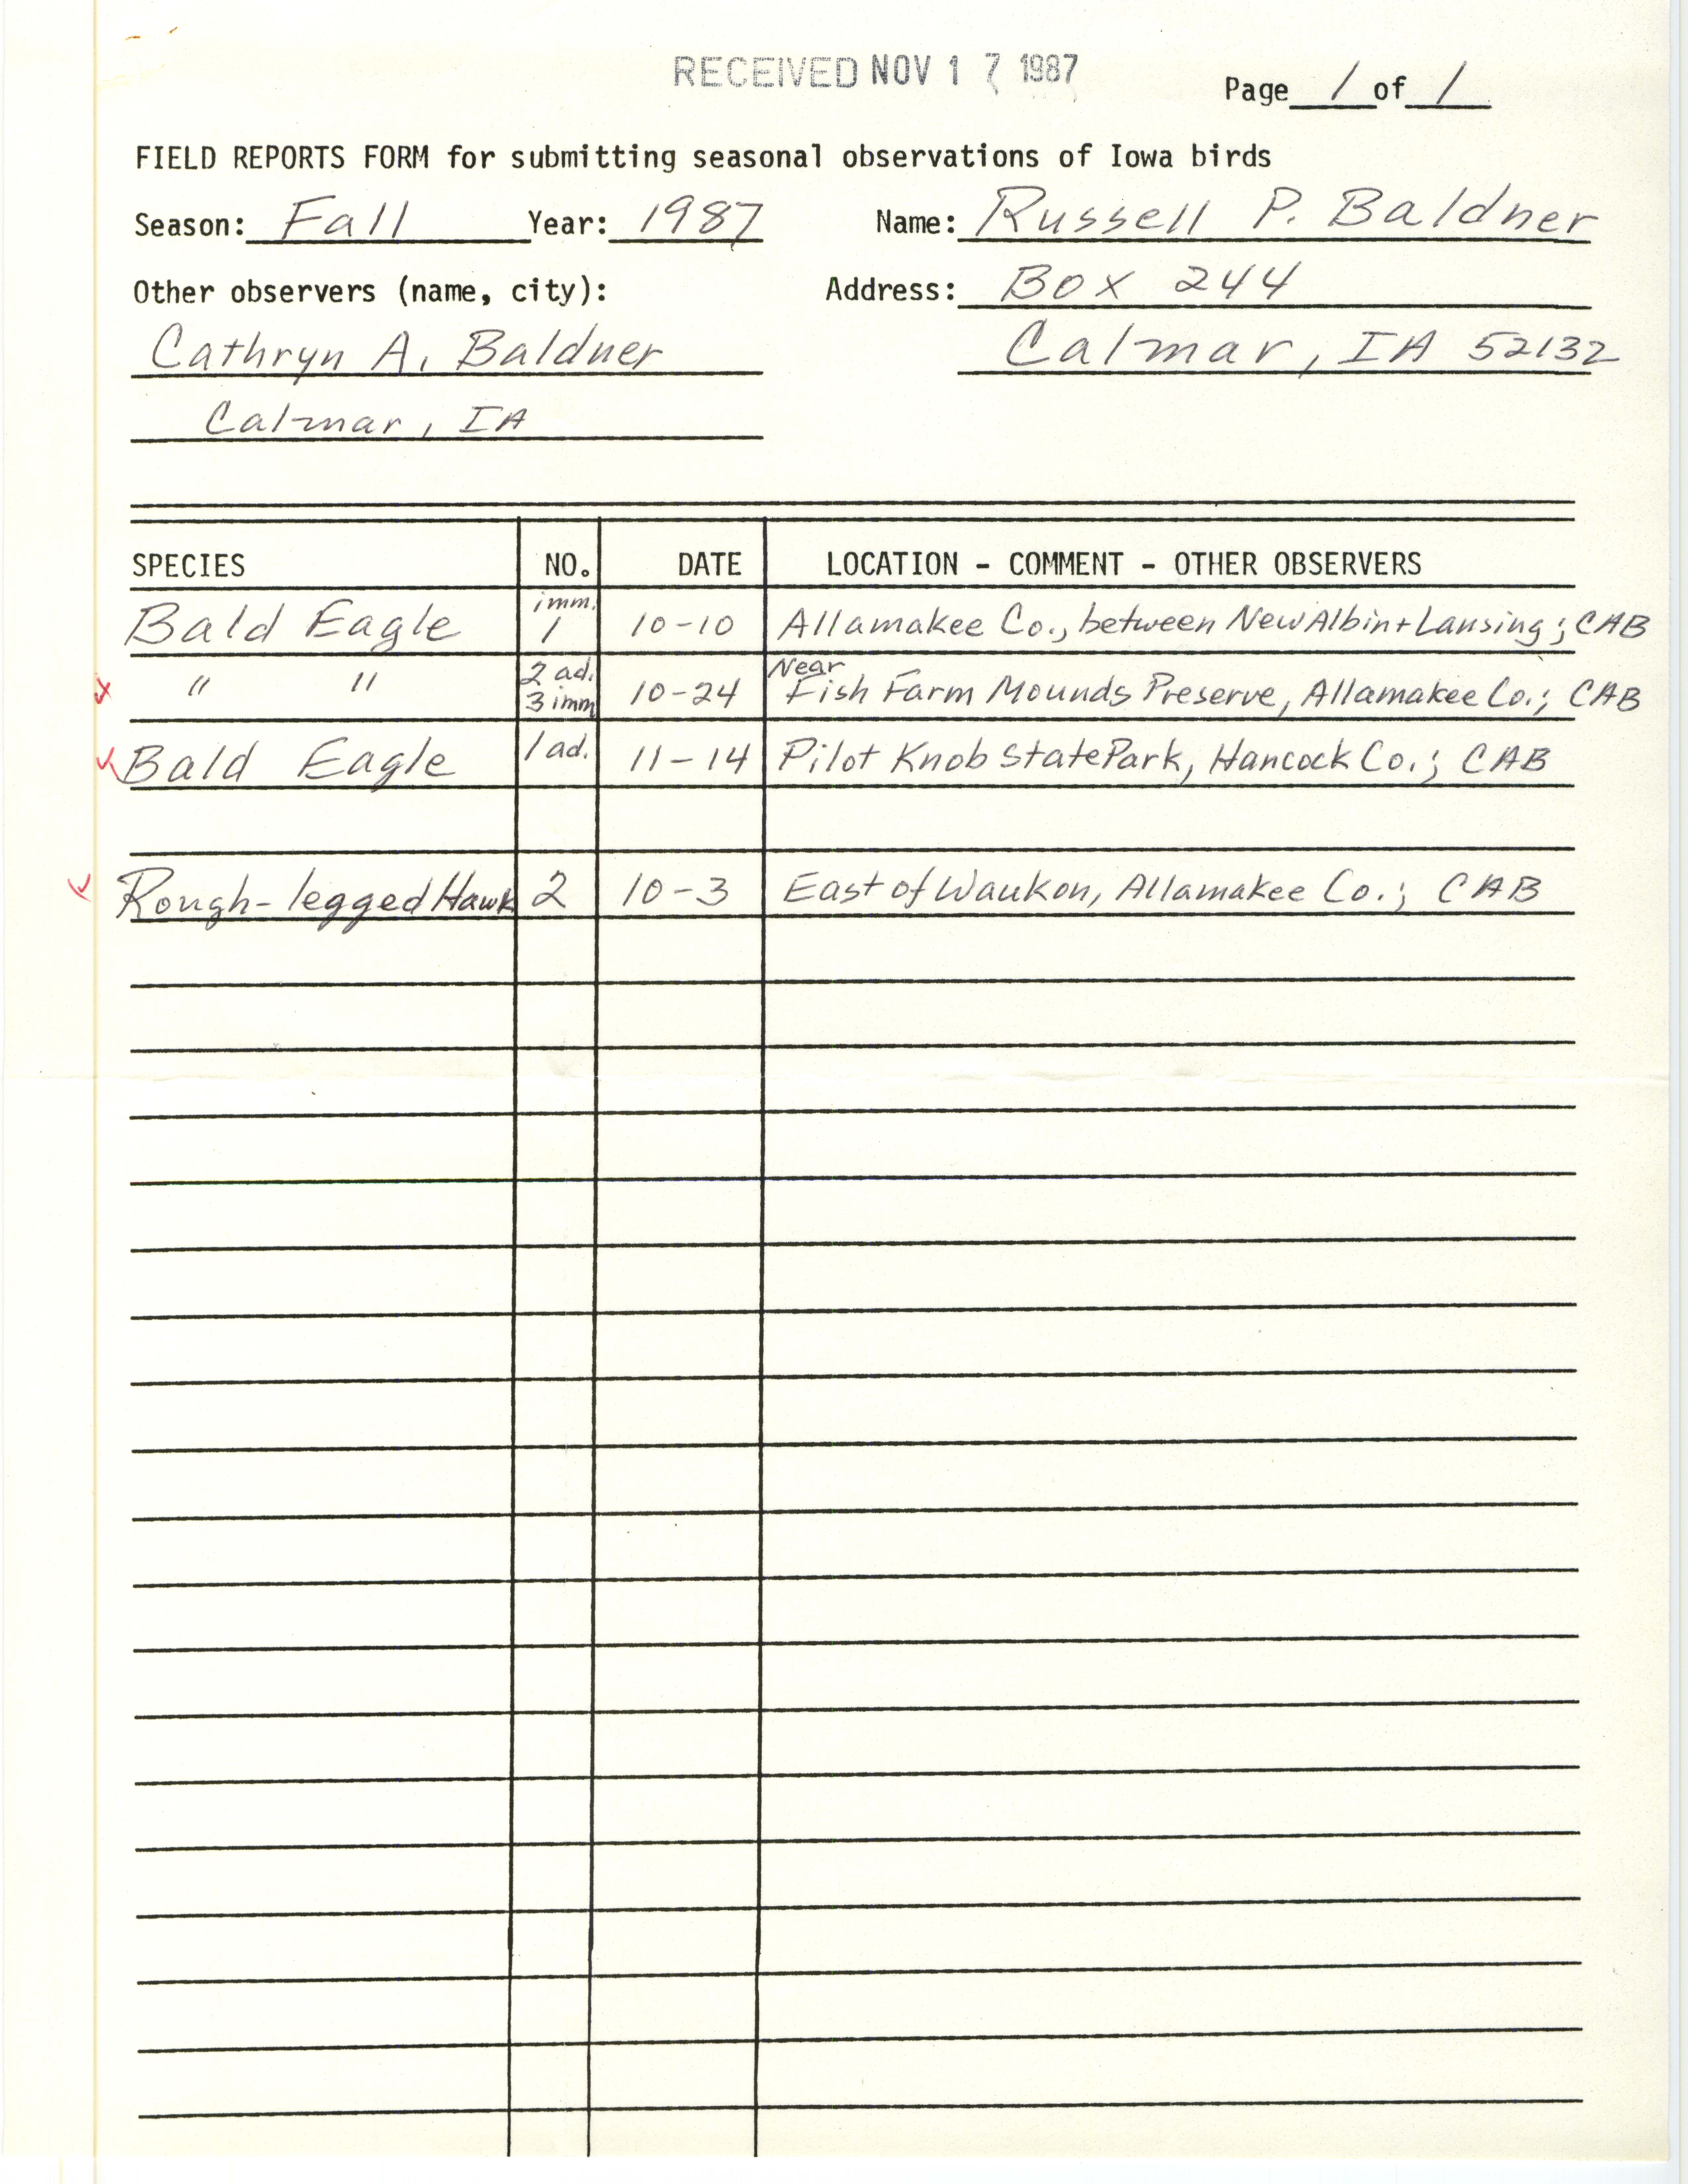 Field reports form for submitting seasonal observations of Iowa birds, Russell P. Baldner, fall 1987